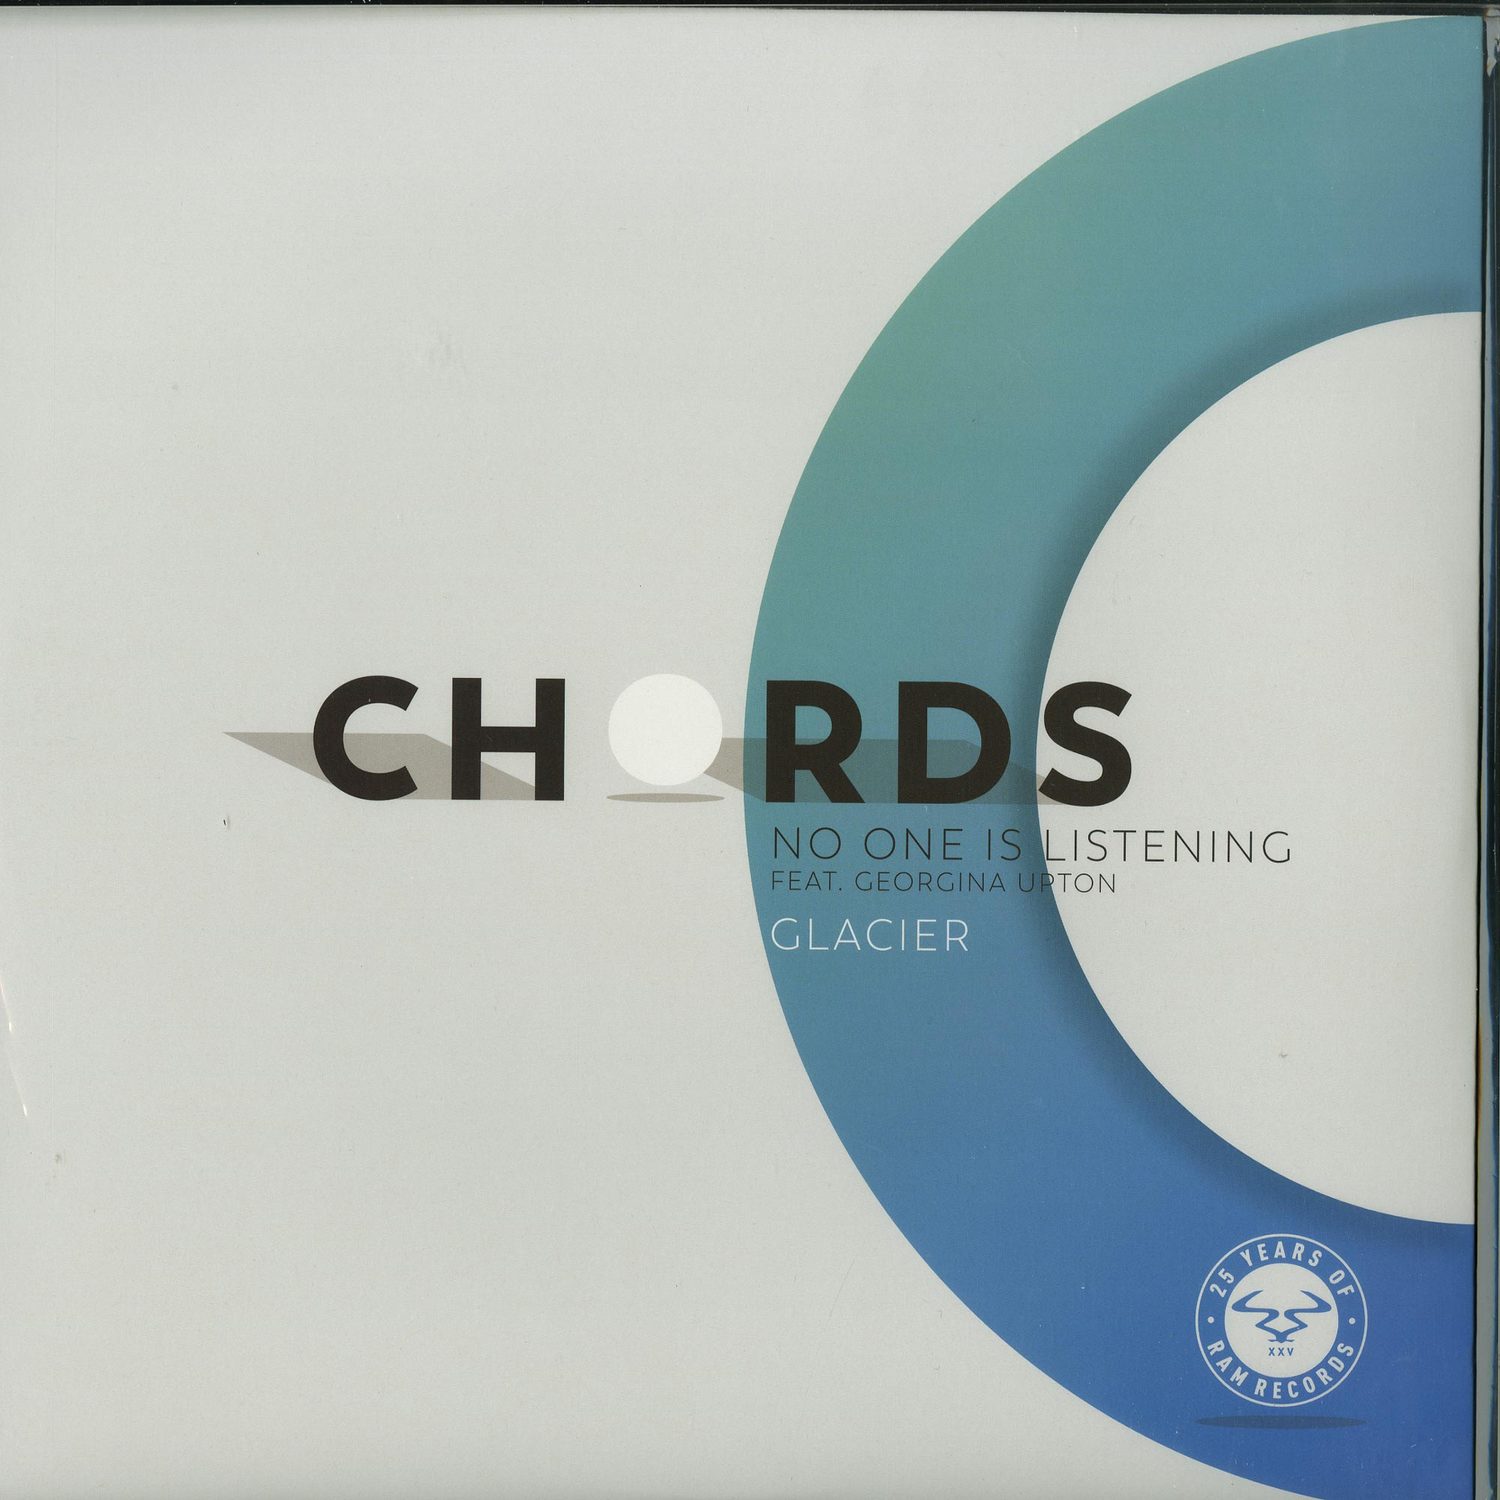 Chords - NO ONE IS LISTENING / GLACIER